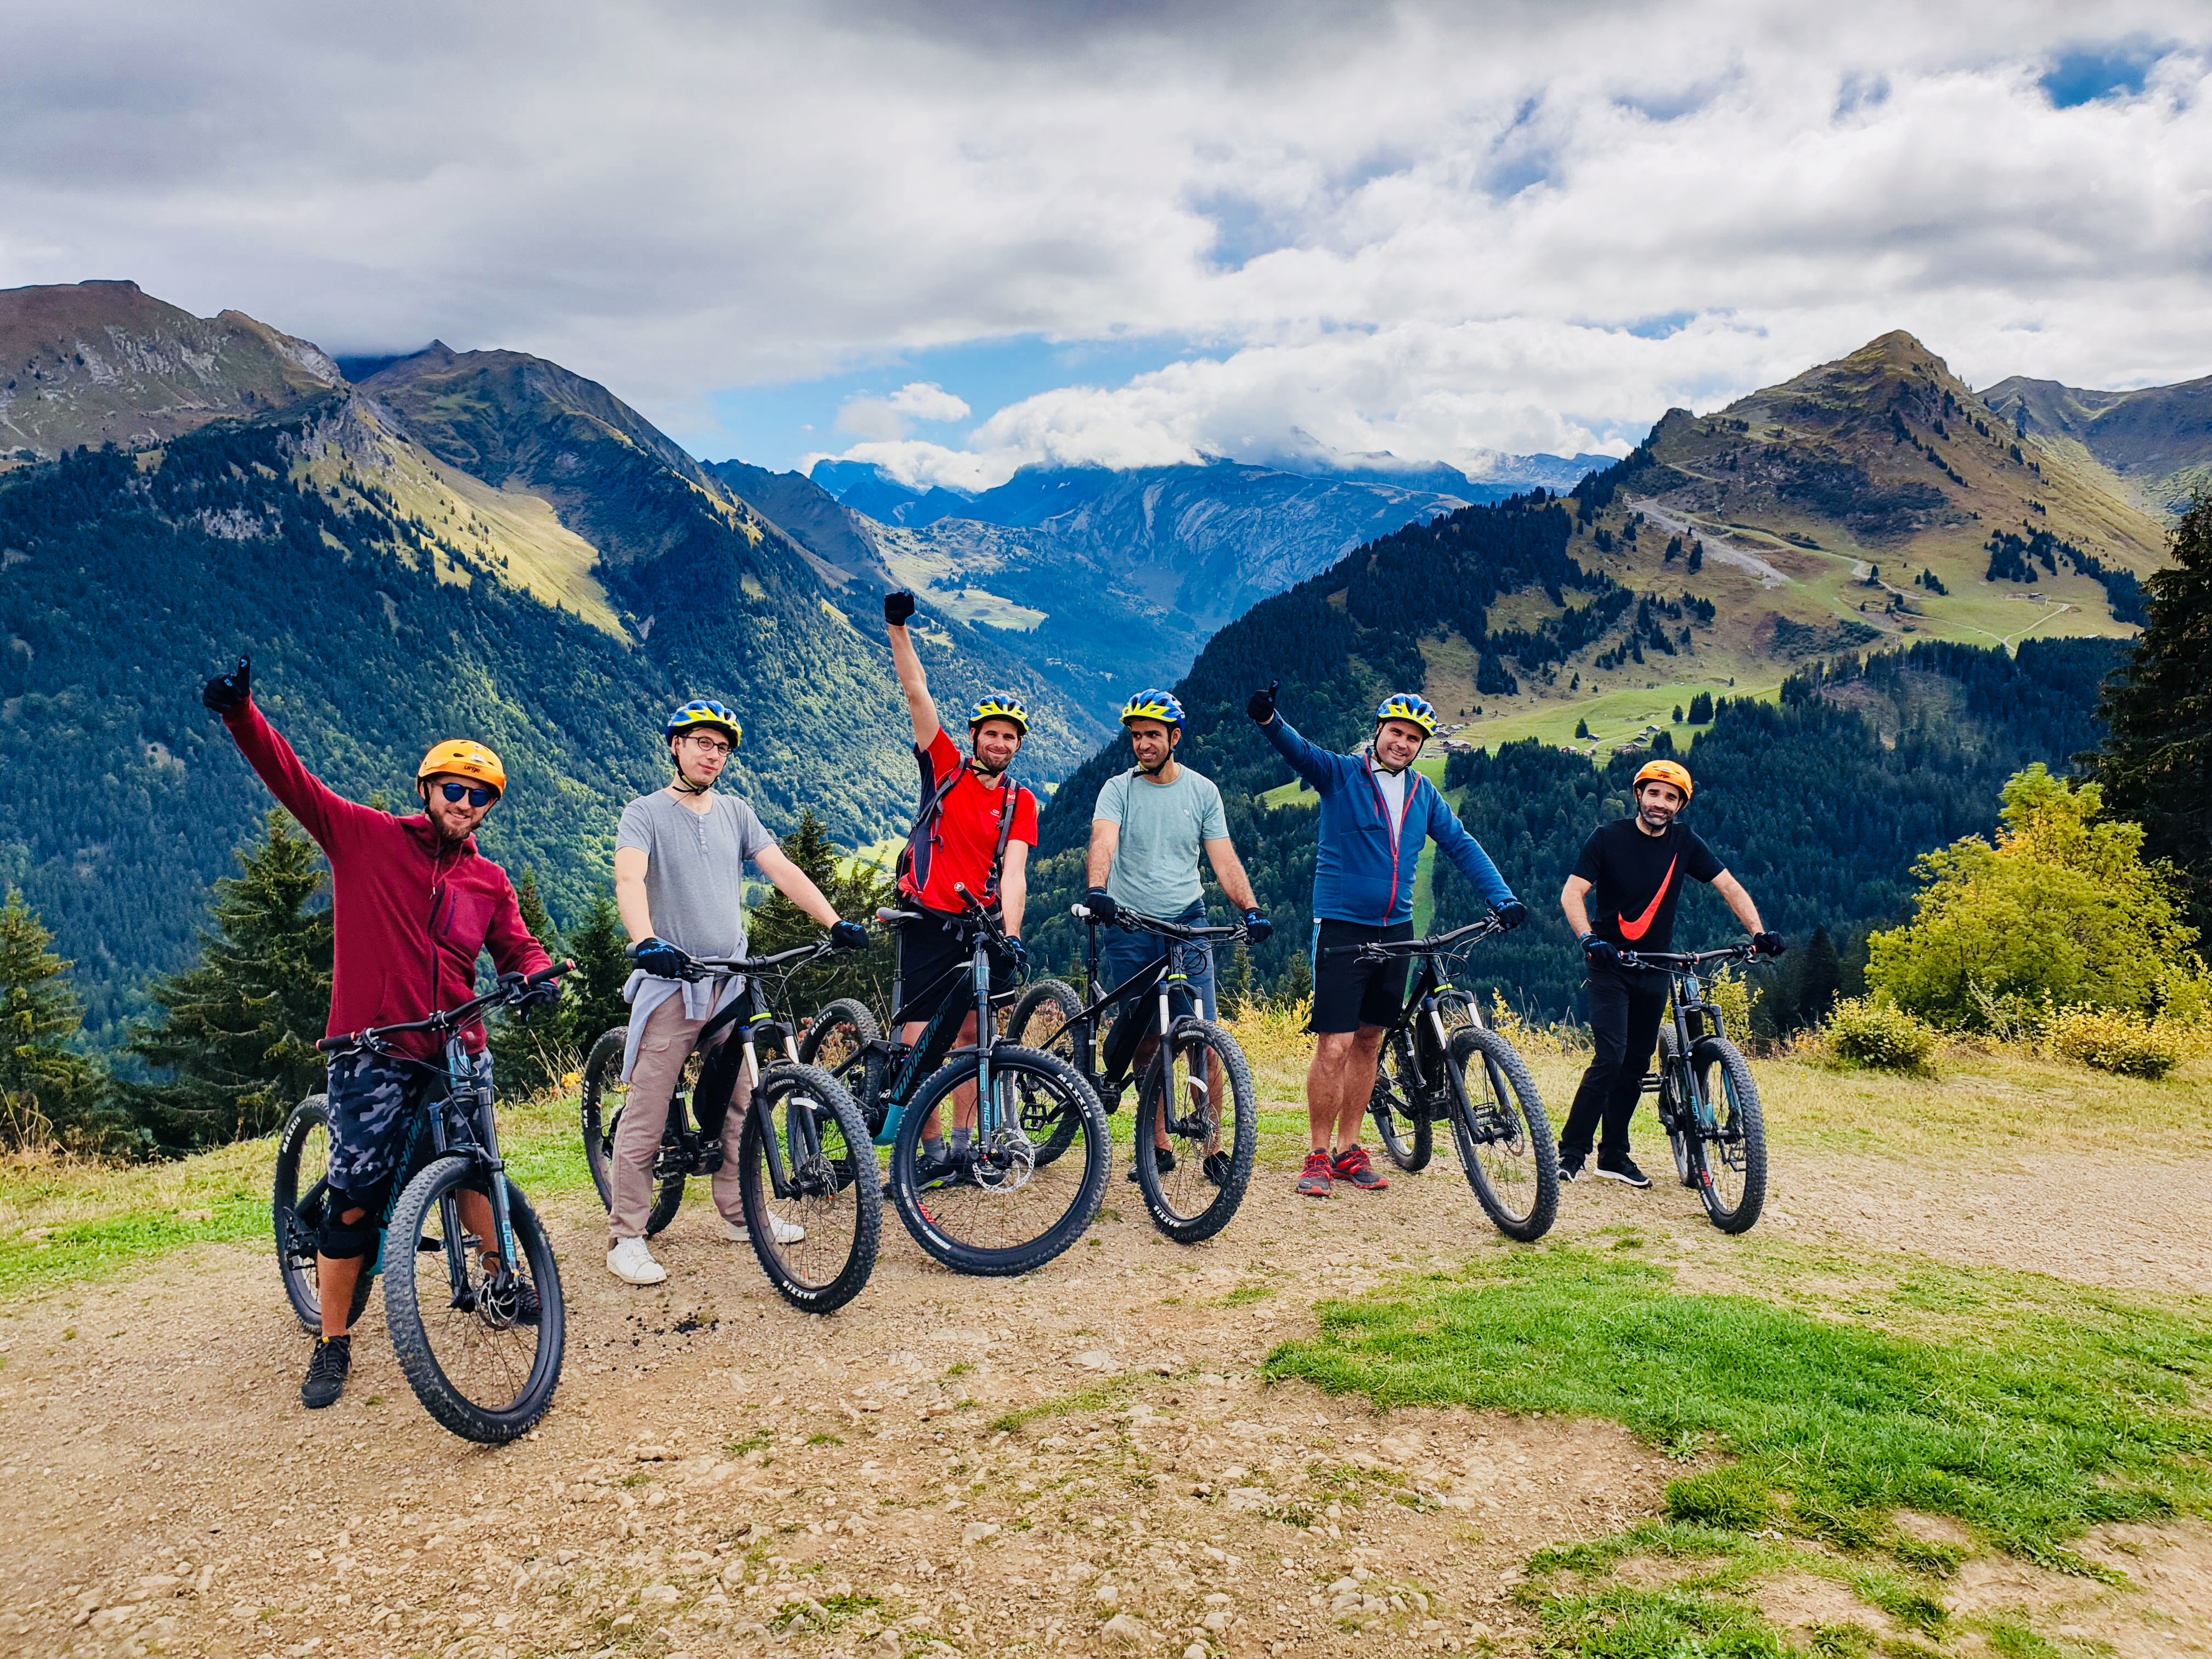 Introduction to / supervision of mountain biking